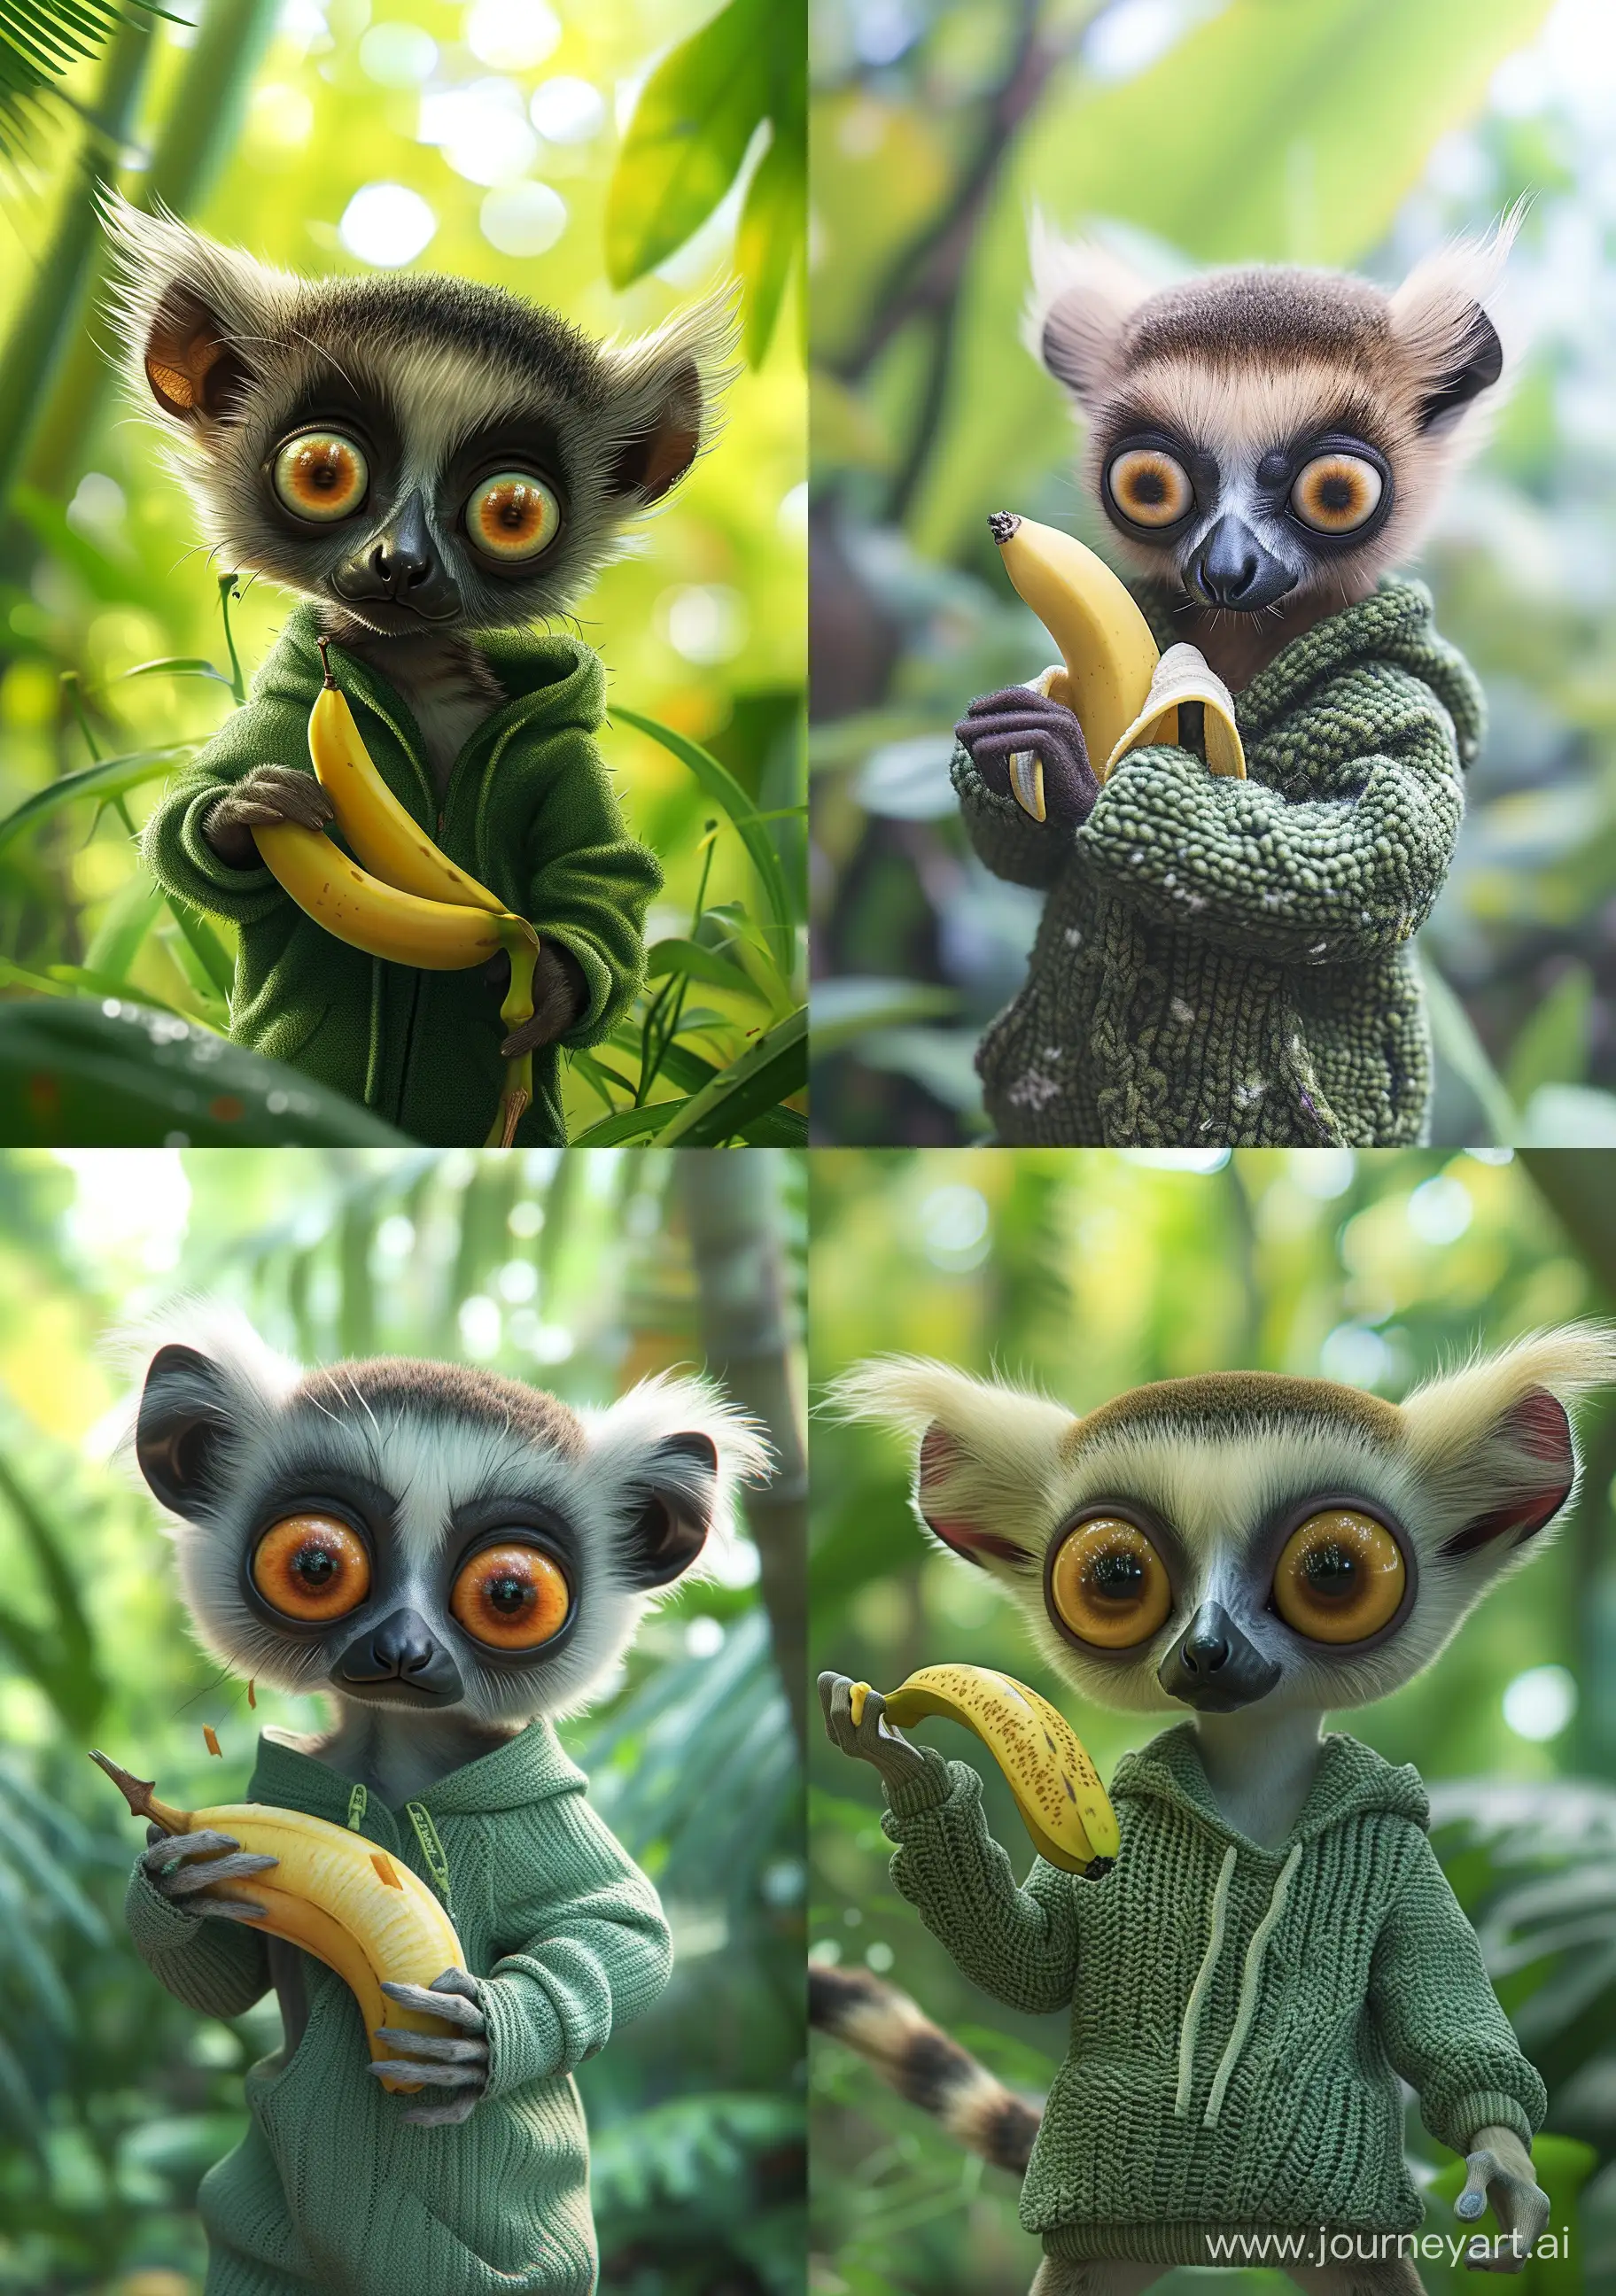 Adorable-Lemur-with-Banana-in-Detailed-Hyperrealistic-Drawing